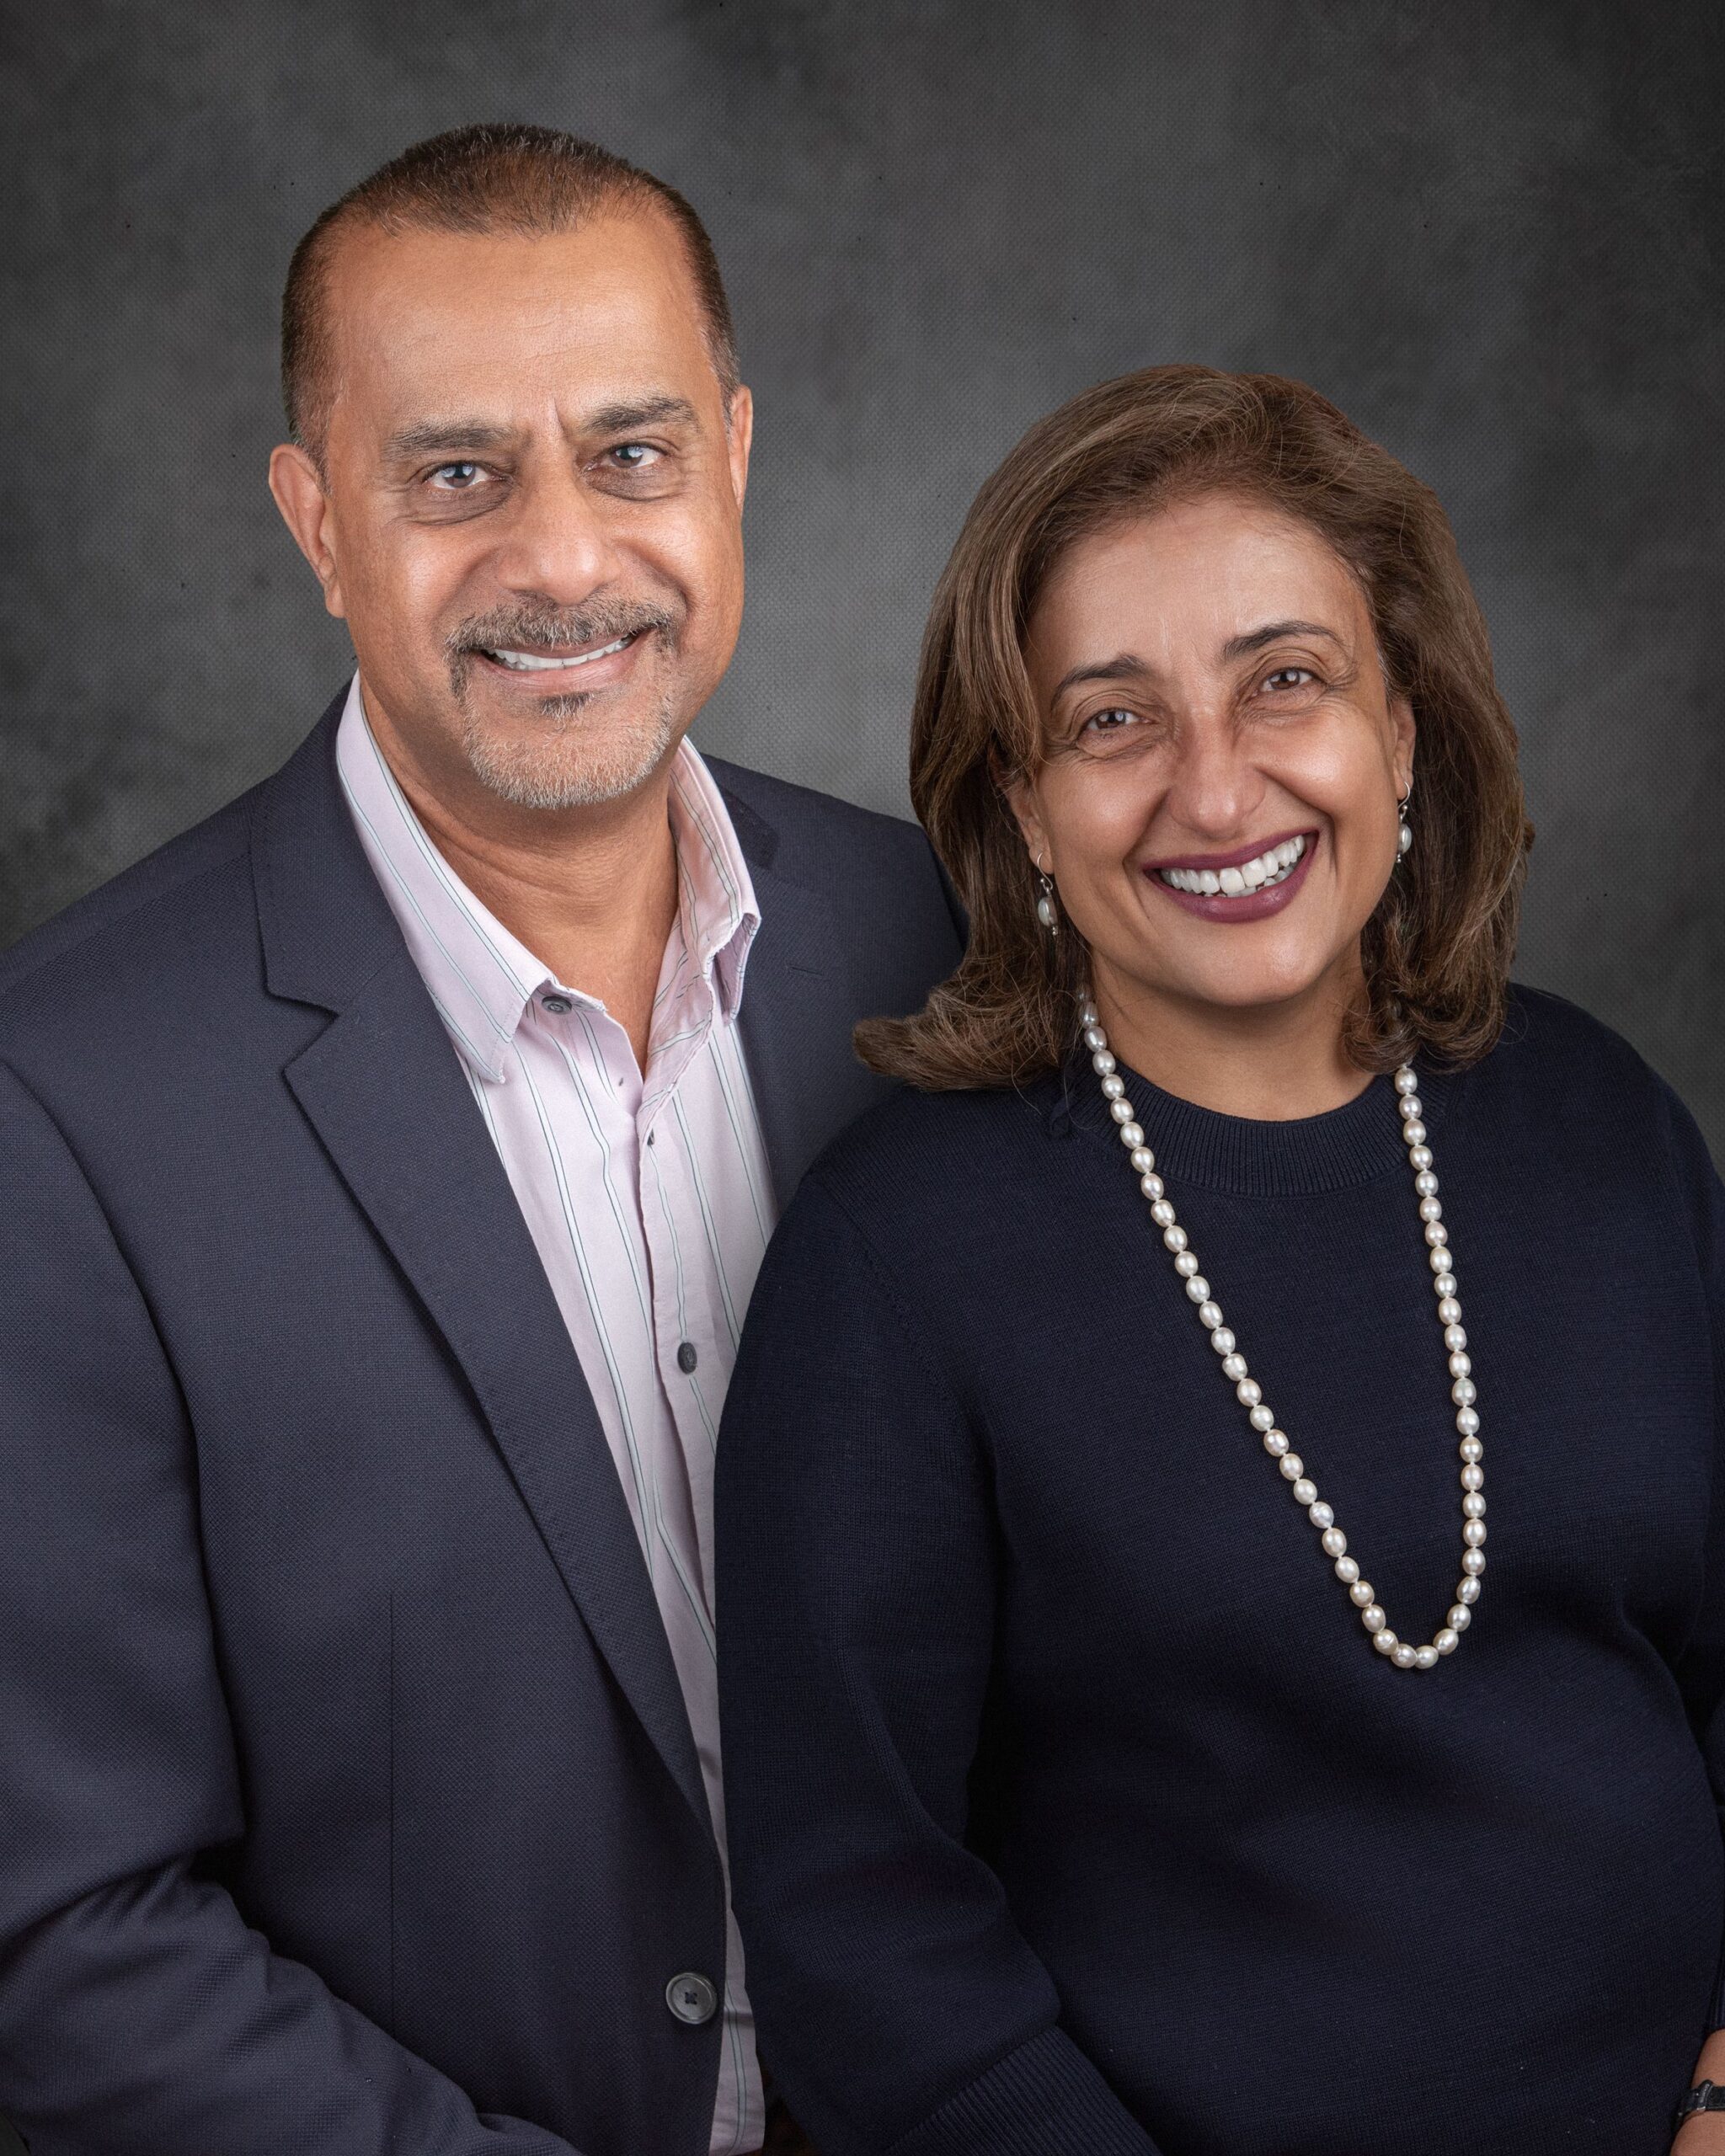 professional headshot owners of commercial cleaning services Enviro-Master Harminder and Pinder Sehmi